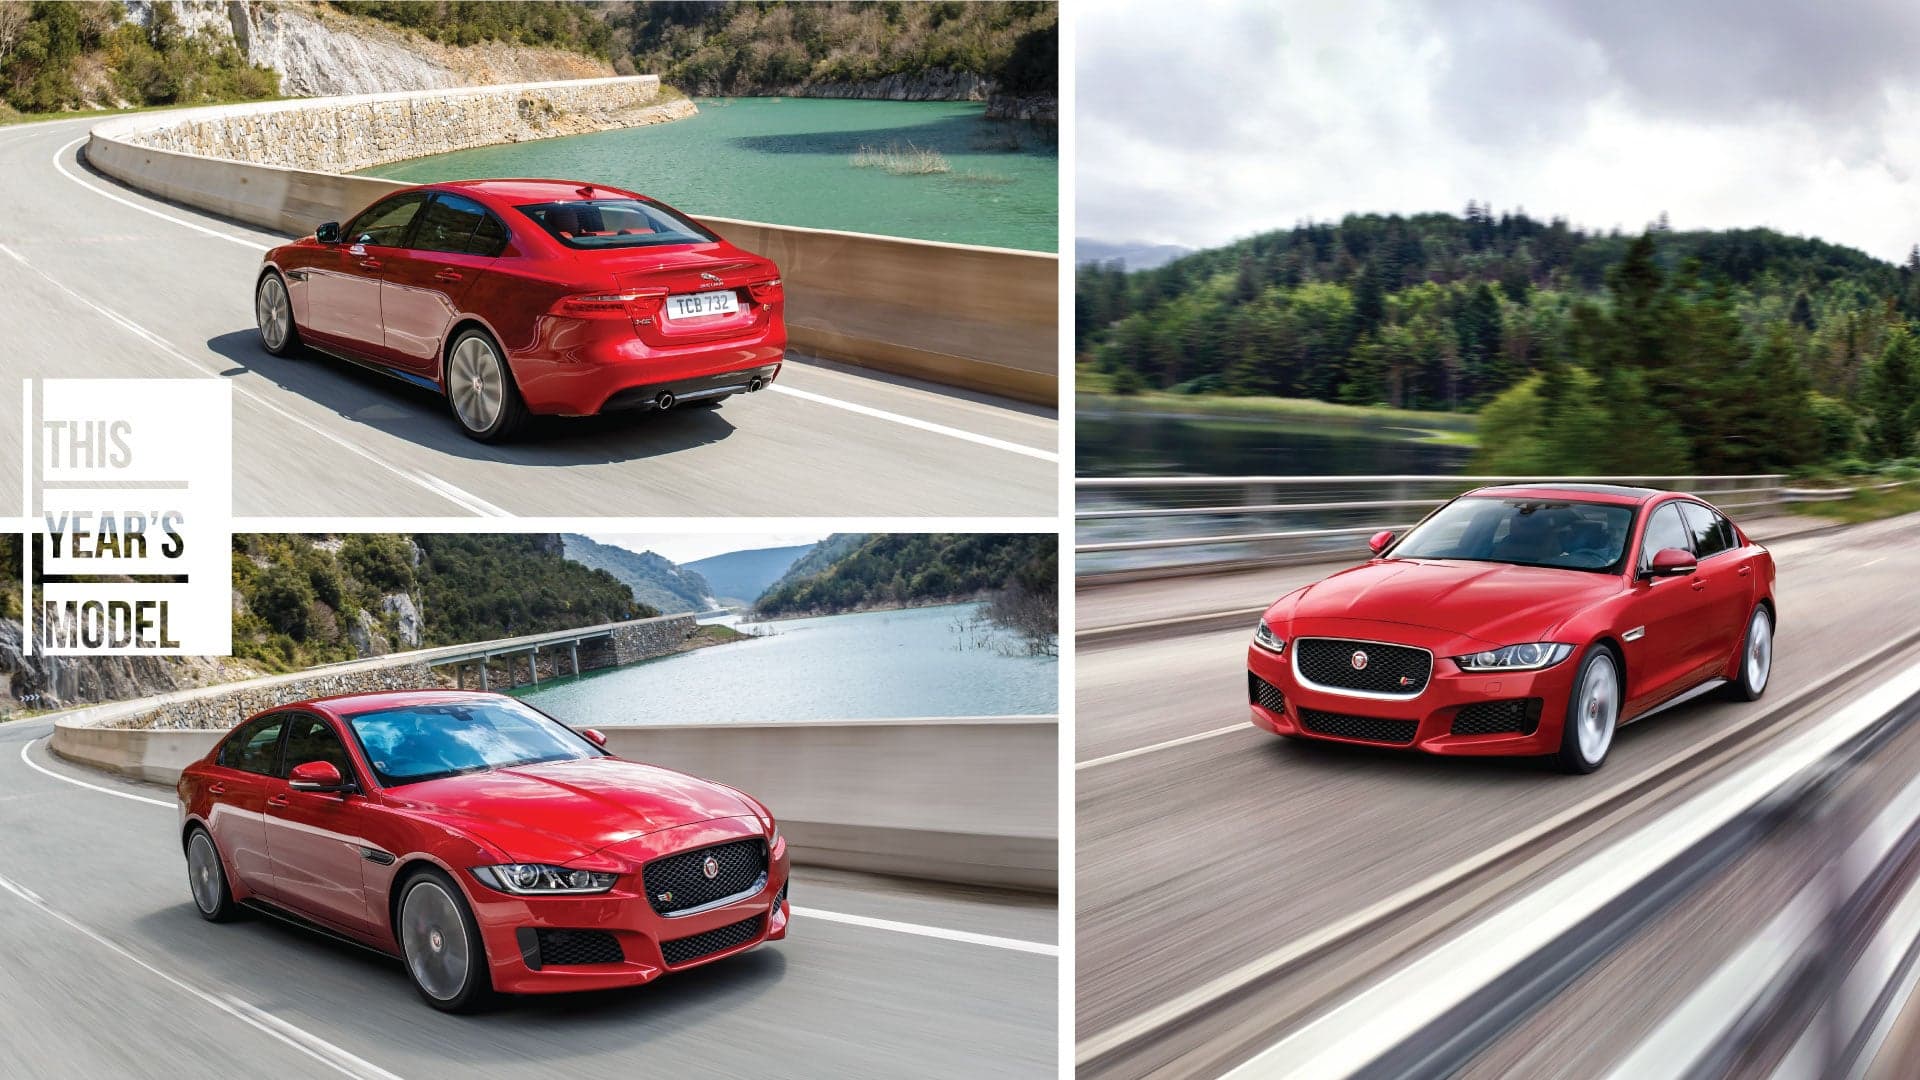 The 2017 Jaguar XE Is a Make-or-Break Car for the Brand